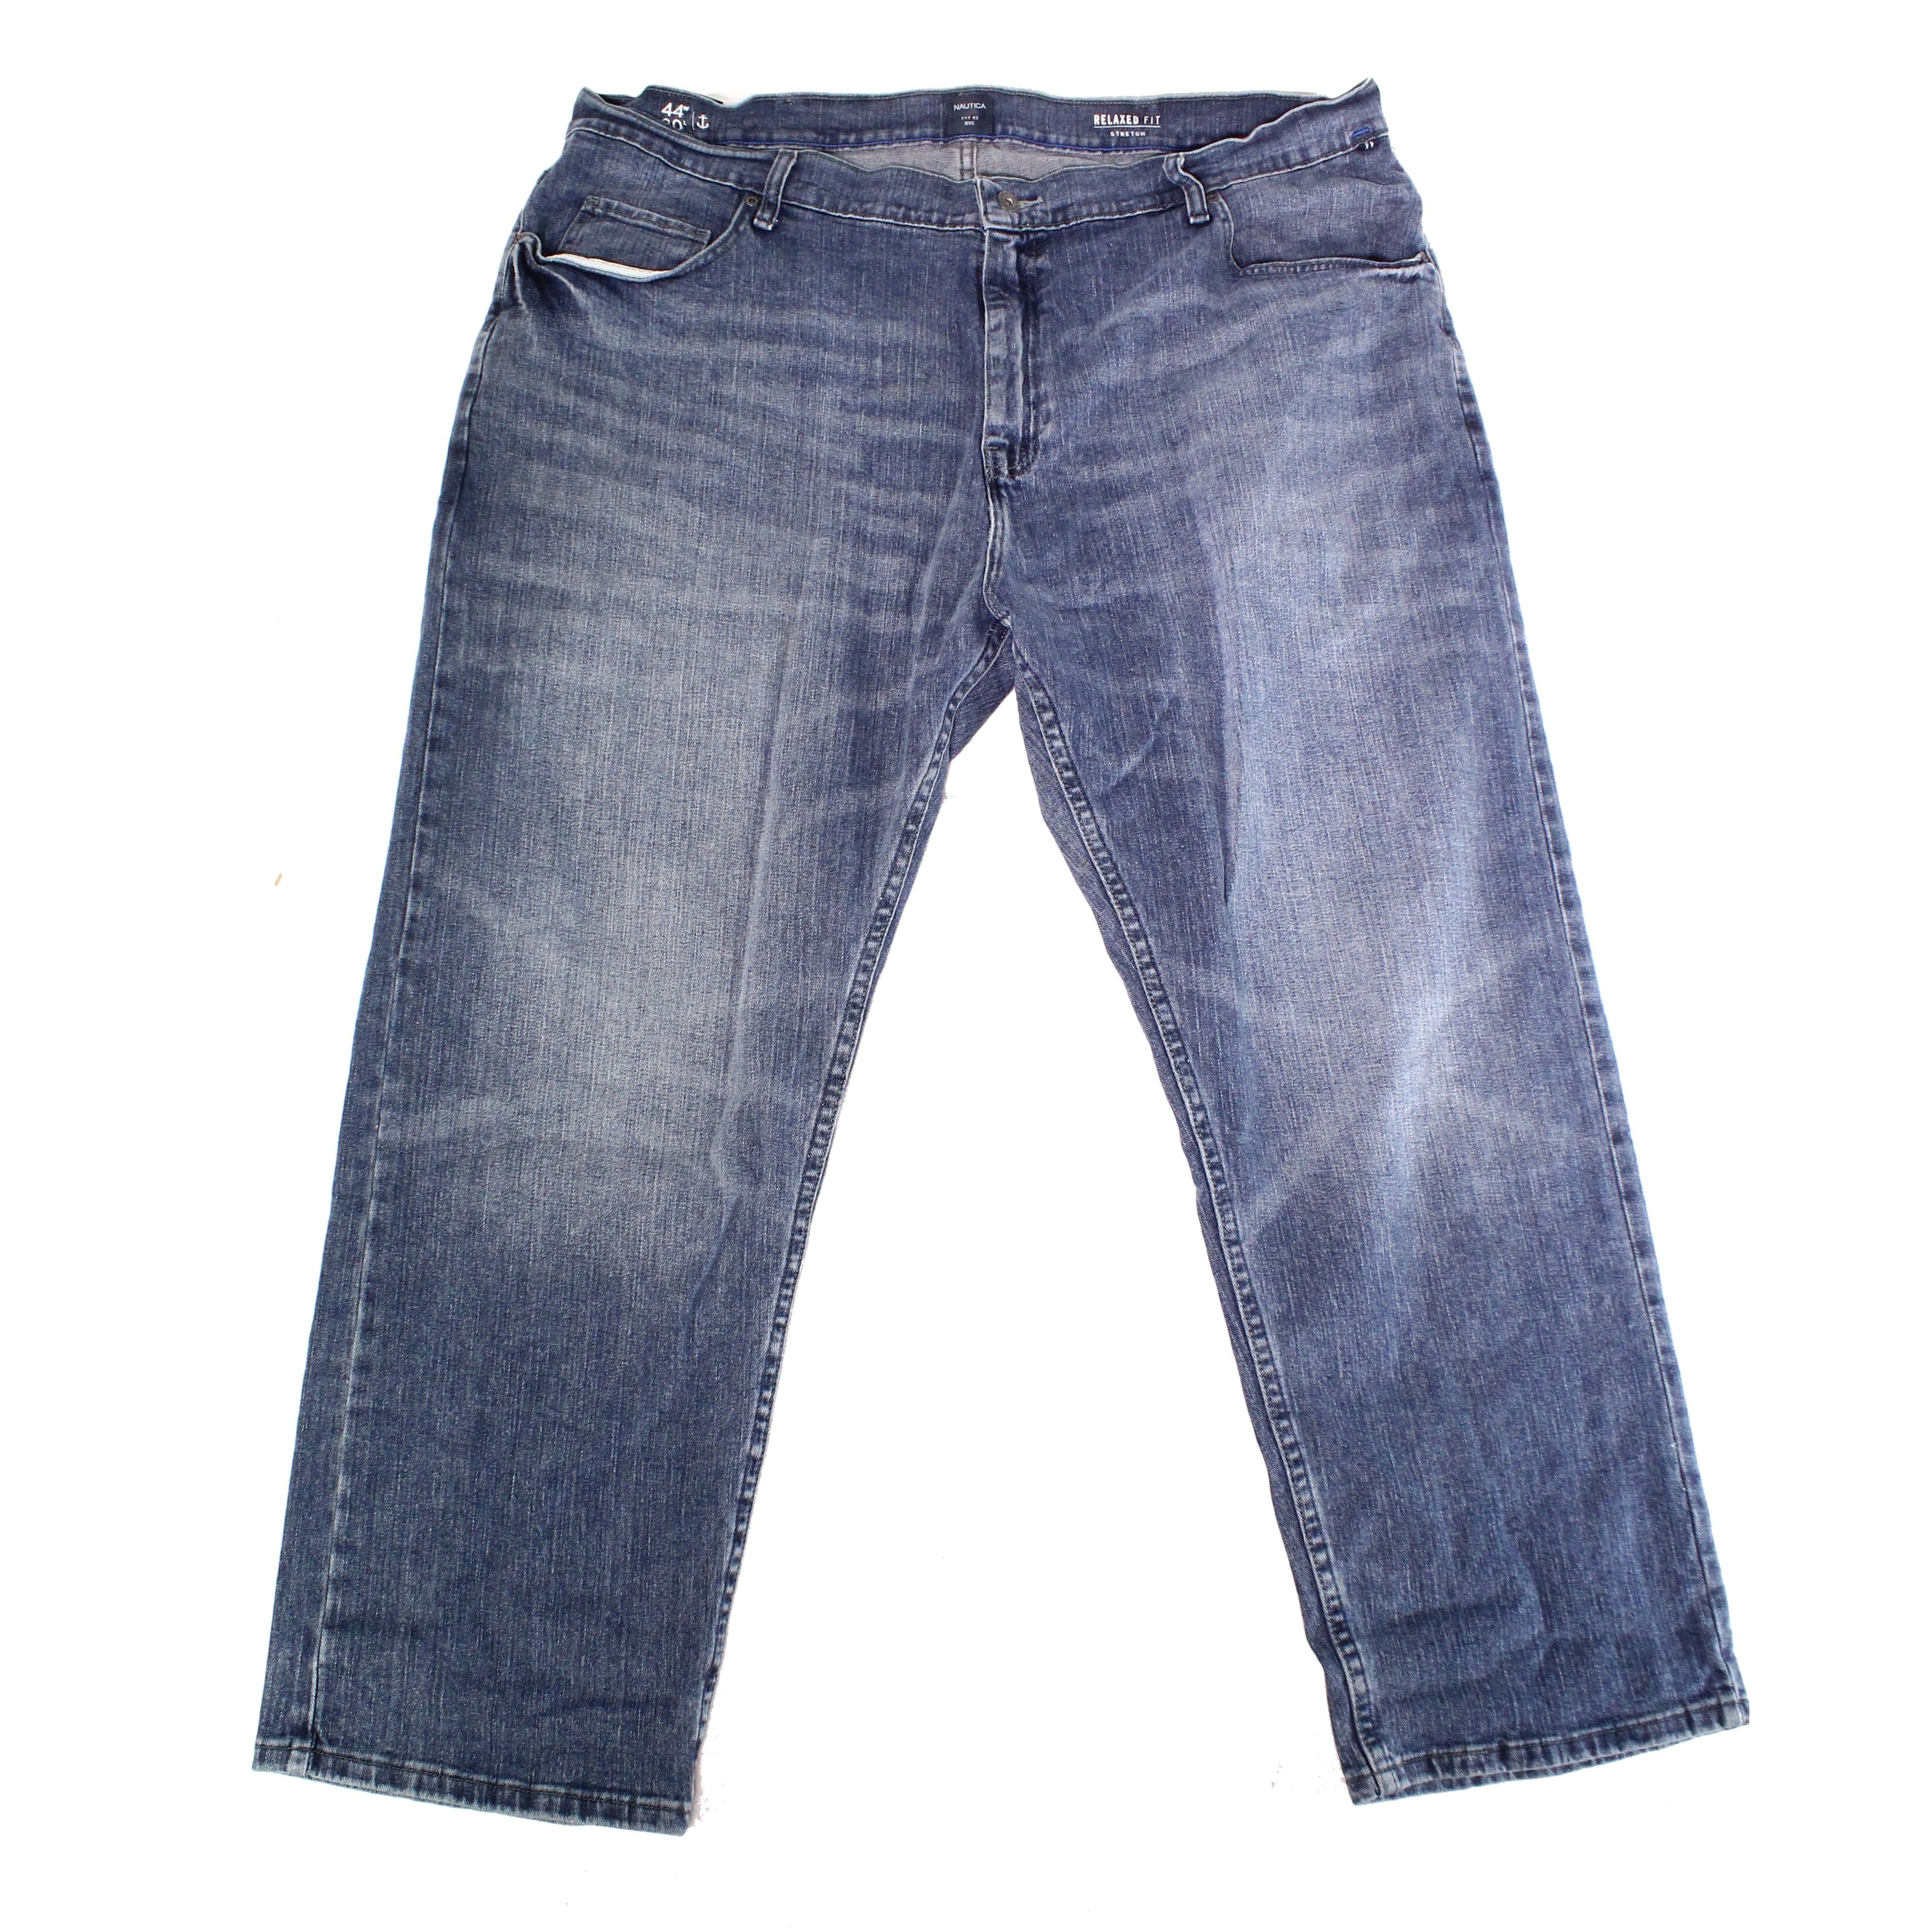 44 x 30 jeans